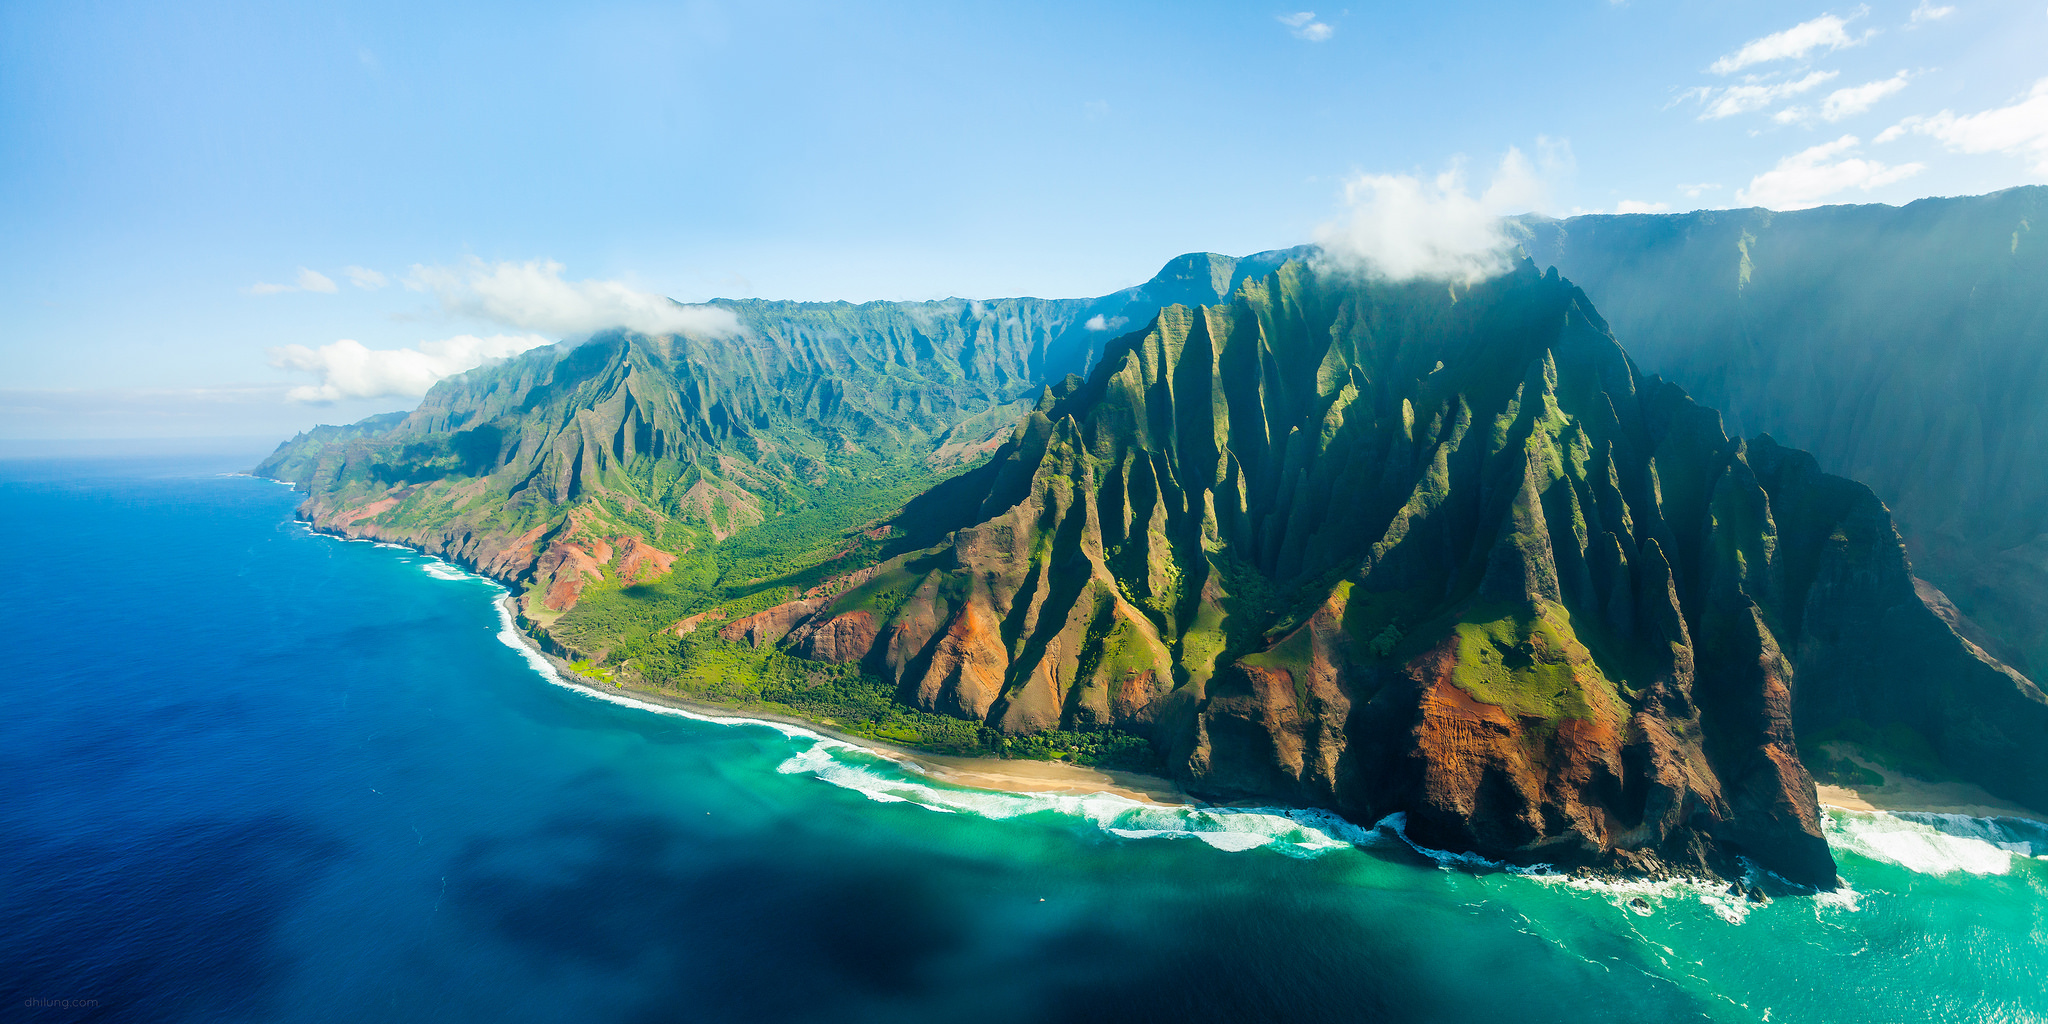 Na Pali Coast, Kauai, Hawaii - An aerial panorama shot taken from a helicopter. Many TV series and movies, including Jurassic Park, were filmed here in this Hawaiian island Kauai, also known as the 'Garden Isle'.